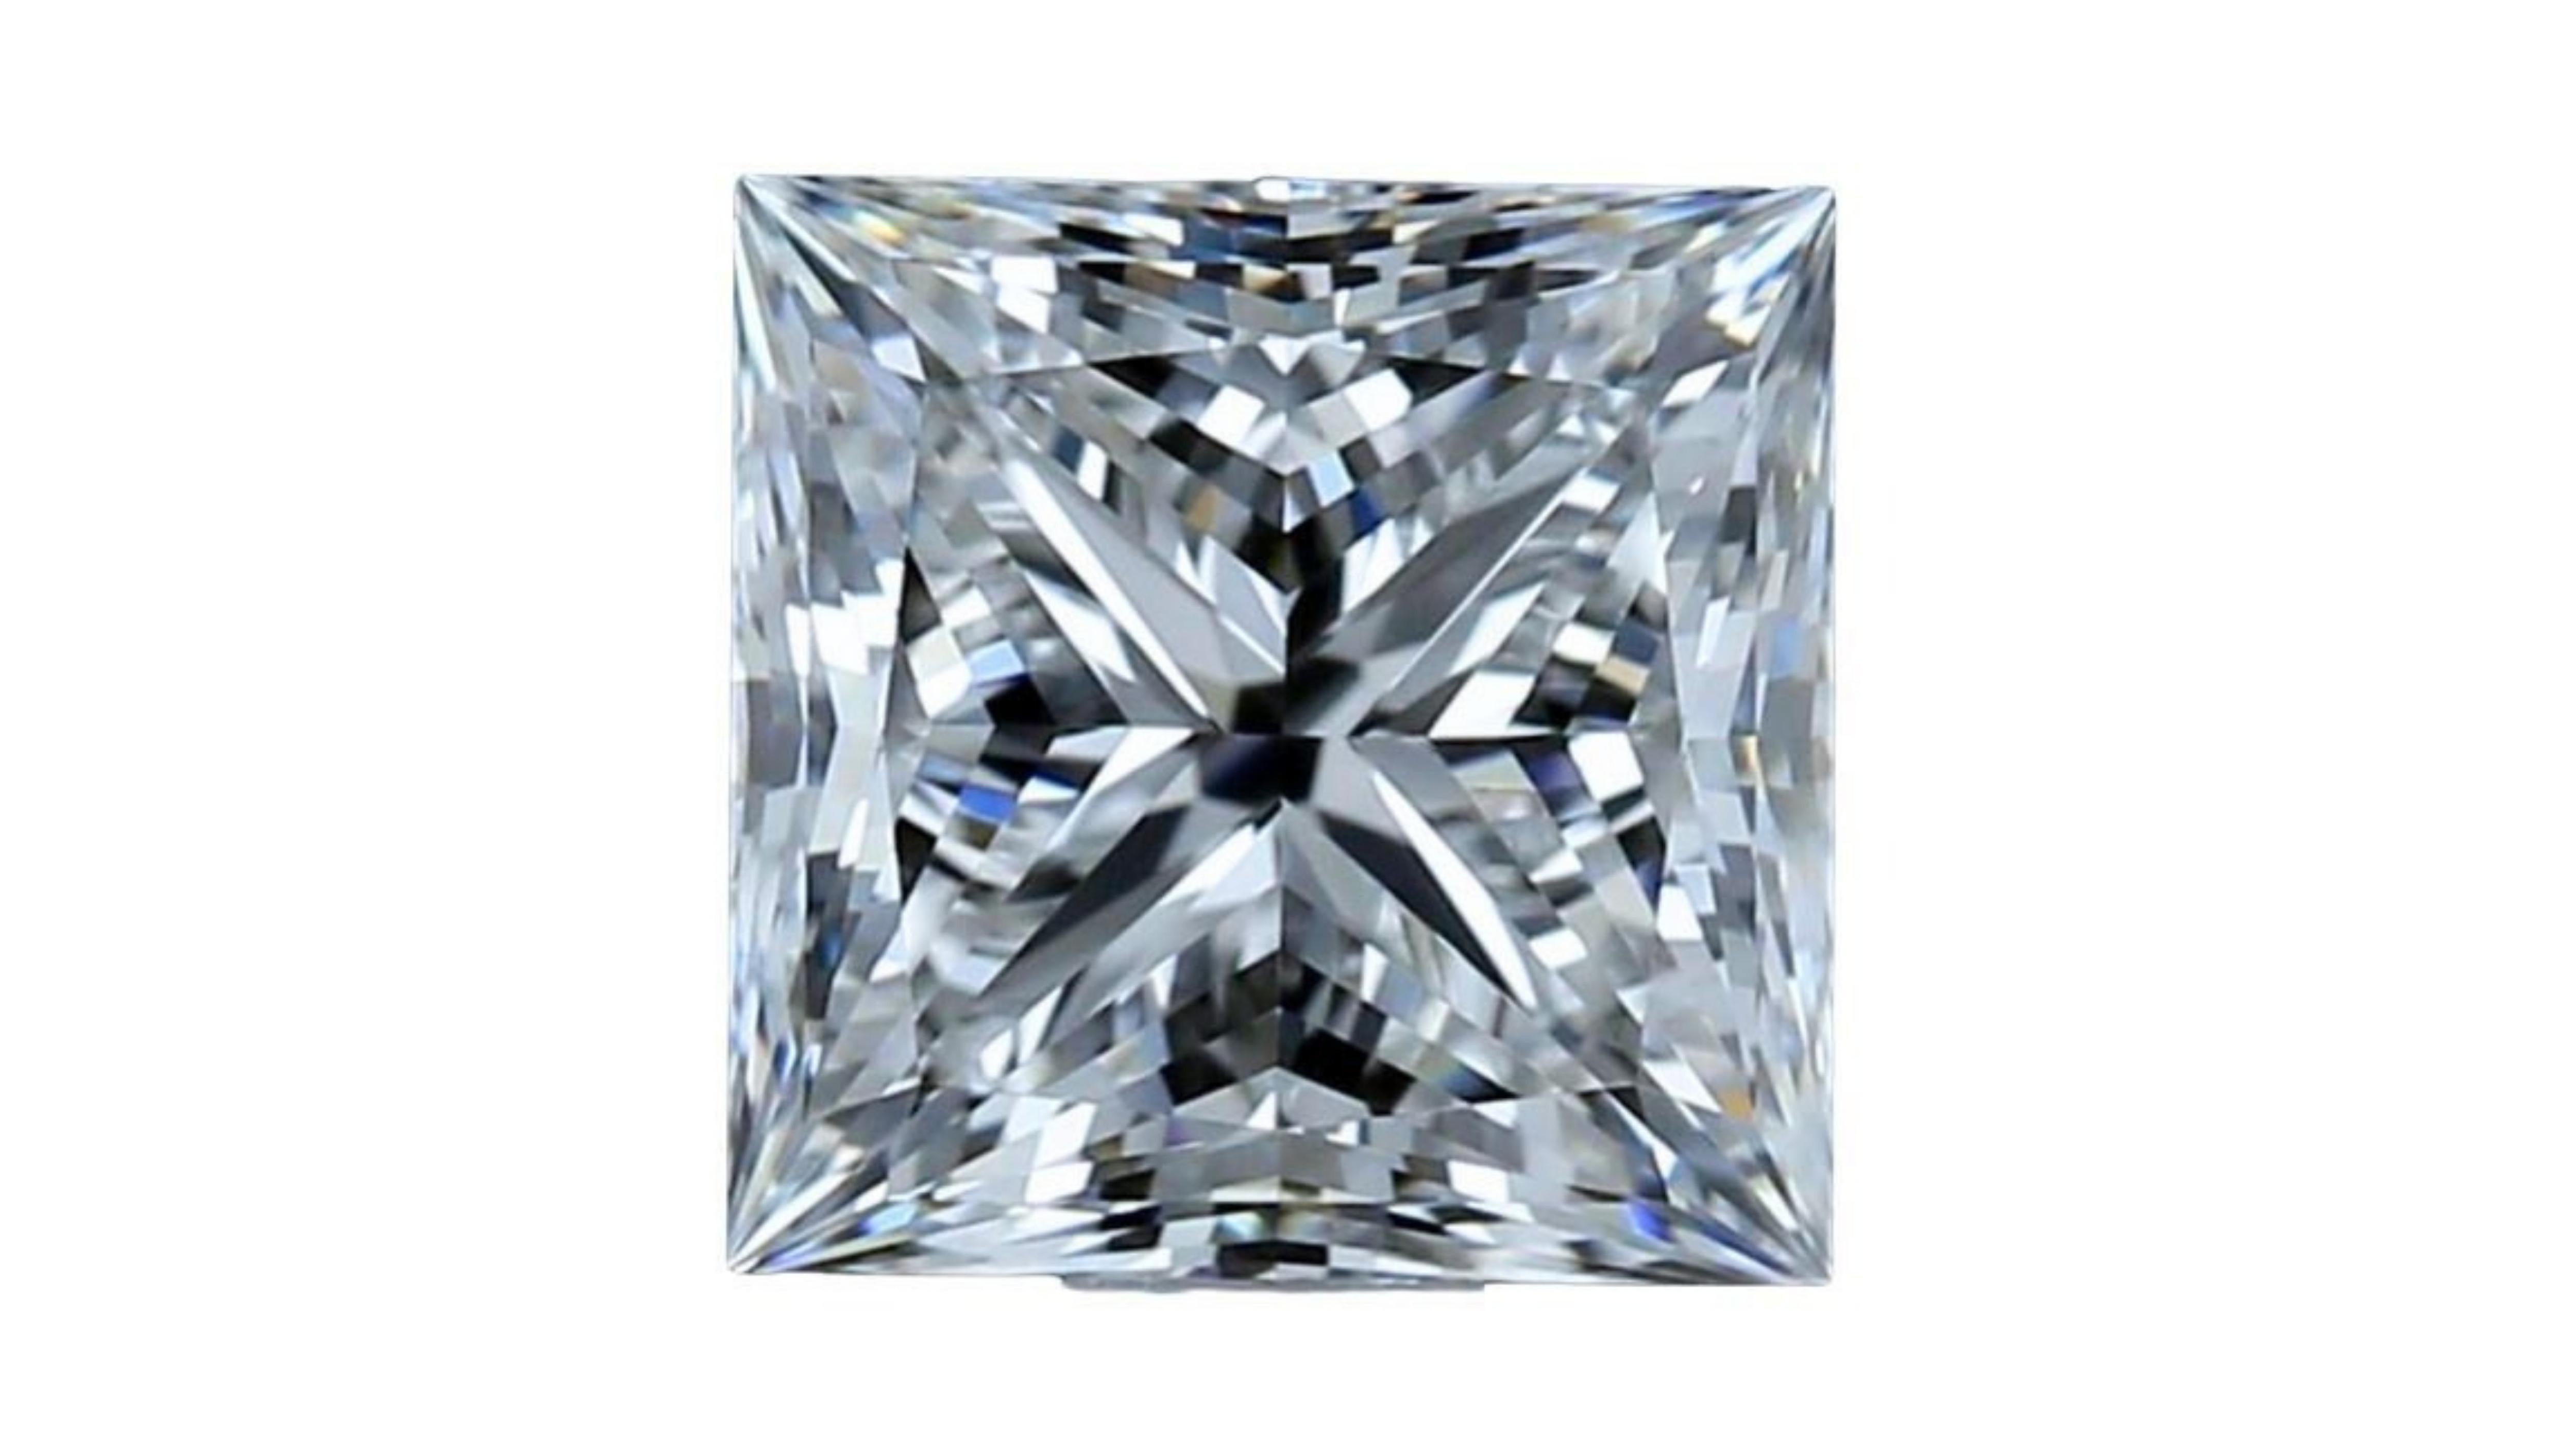 This is a 1.5 carat G VS1 very good polish and good symmetry square modified brilliant diamond. It is GIA-certified and comes with a laser inscription number. The diamond is in excellent condition and has a sparkling appearance. It is perfect for